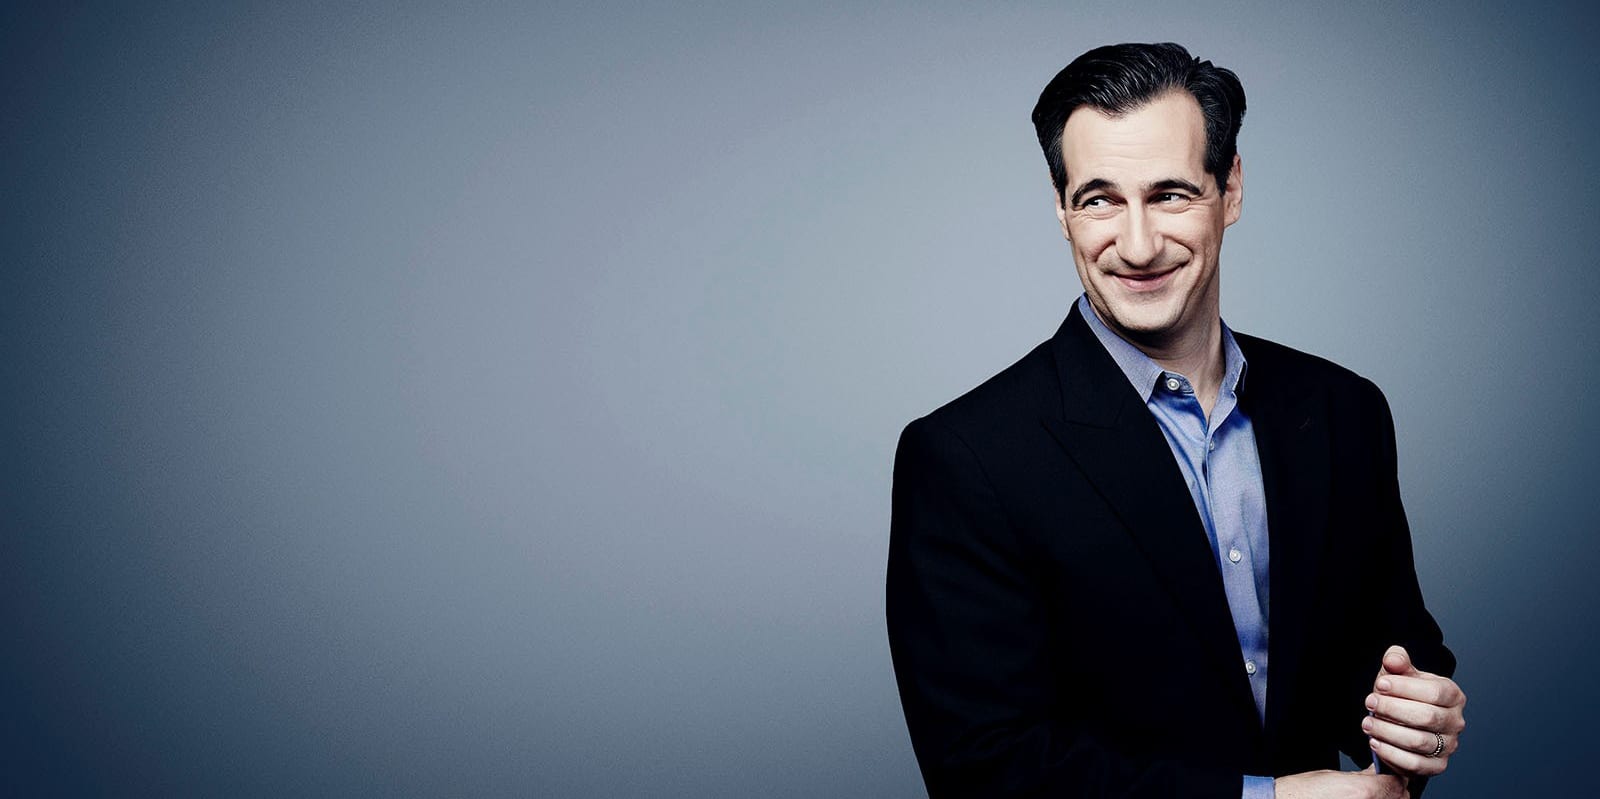 Who's CNN 10 anchor Carl Azuz? Wiki Age, Net Worth, Married, Height